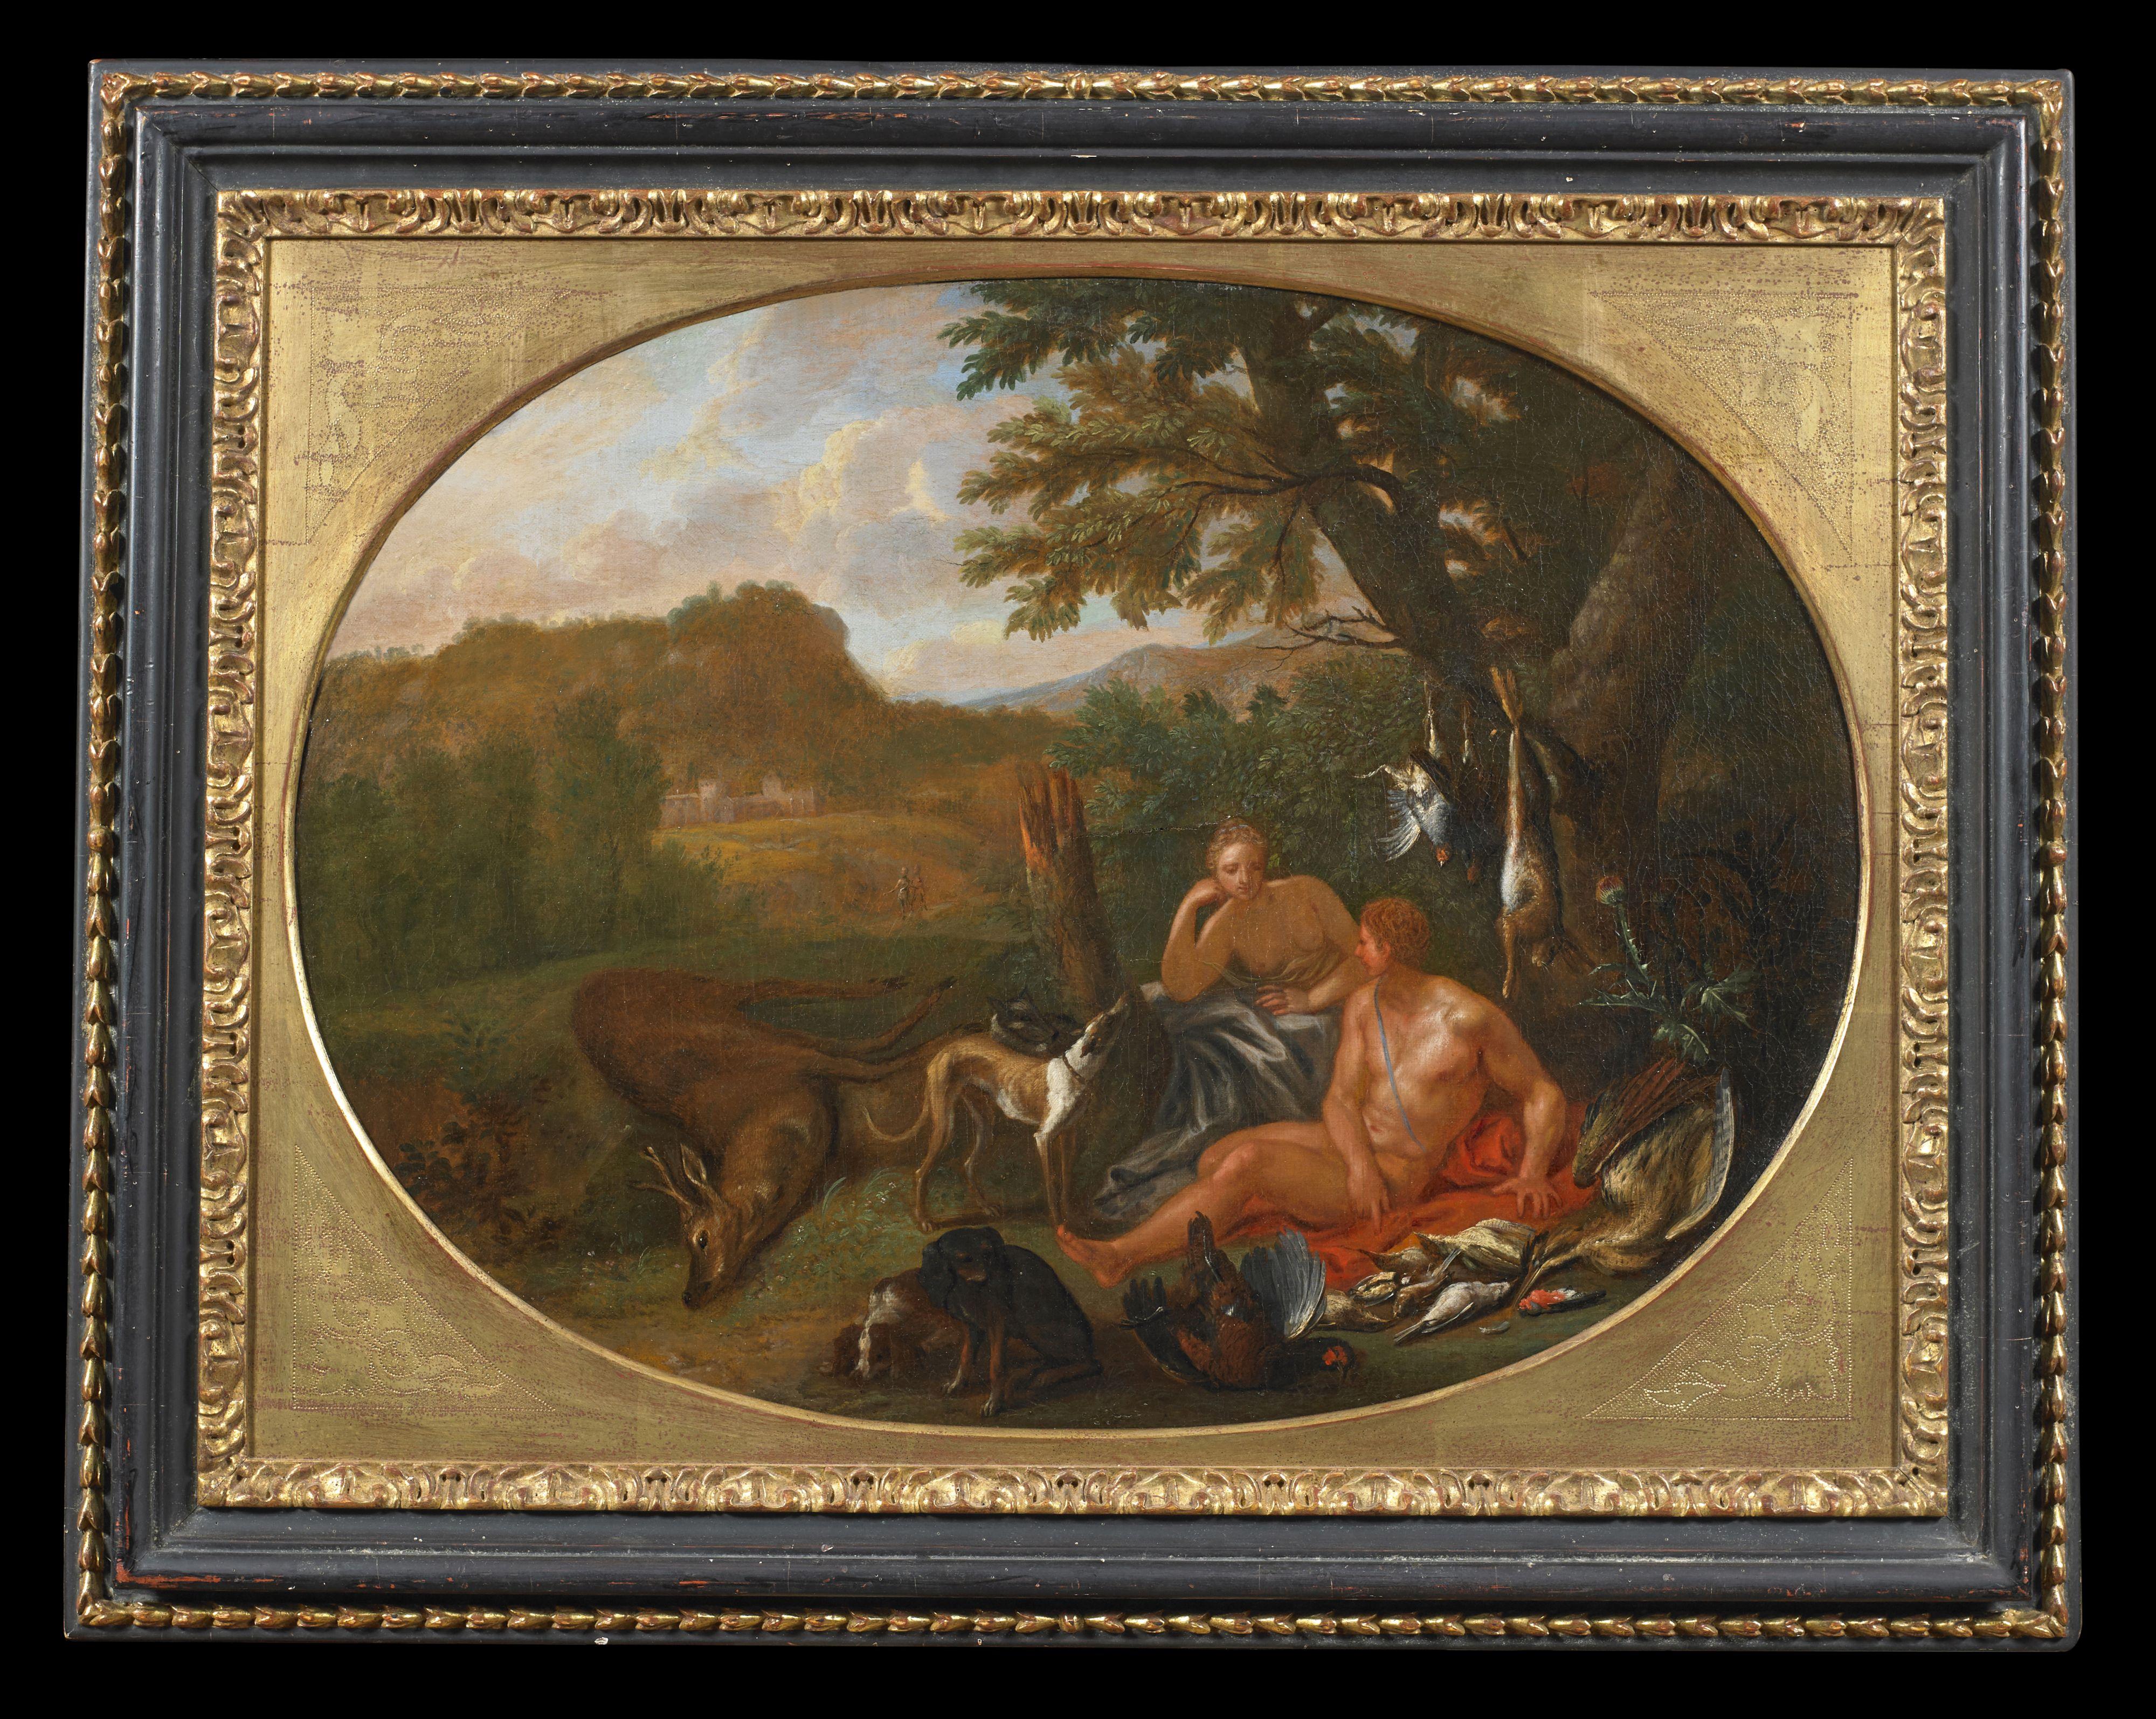 Pair of oval paintings measuring 66 x 89 cm without frame and 90 x 115 cm with coeval frame depicting two gallant moments during a rest from hunting by painter Hendrik Van Limborch ( The Hague 1681 - 1759 ).

Beautiful color impact with these light,